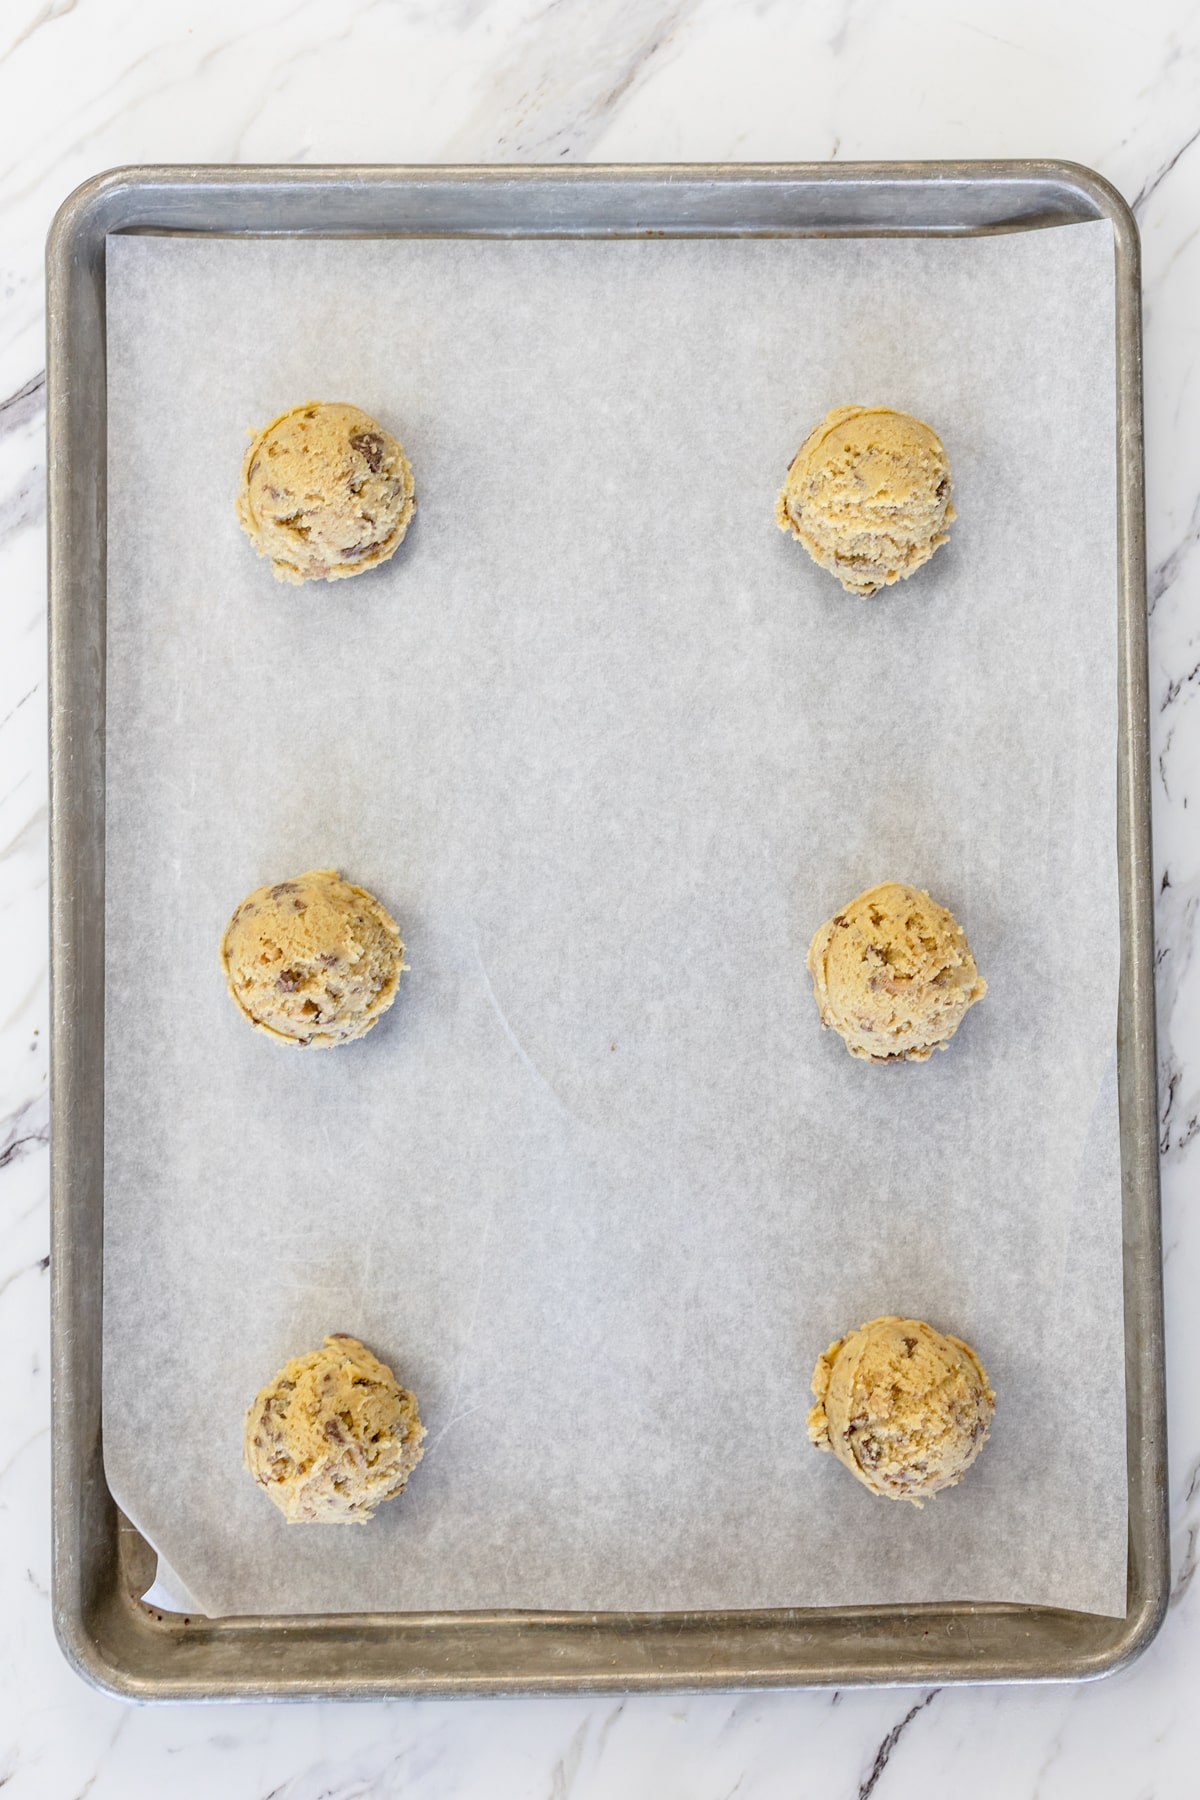 Top view of cookie dough balls on parchment paper on a baking tray.